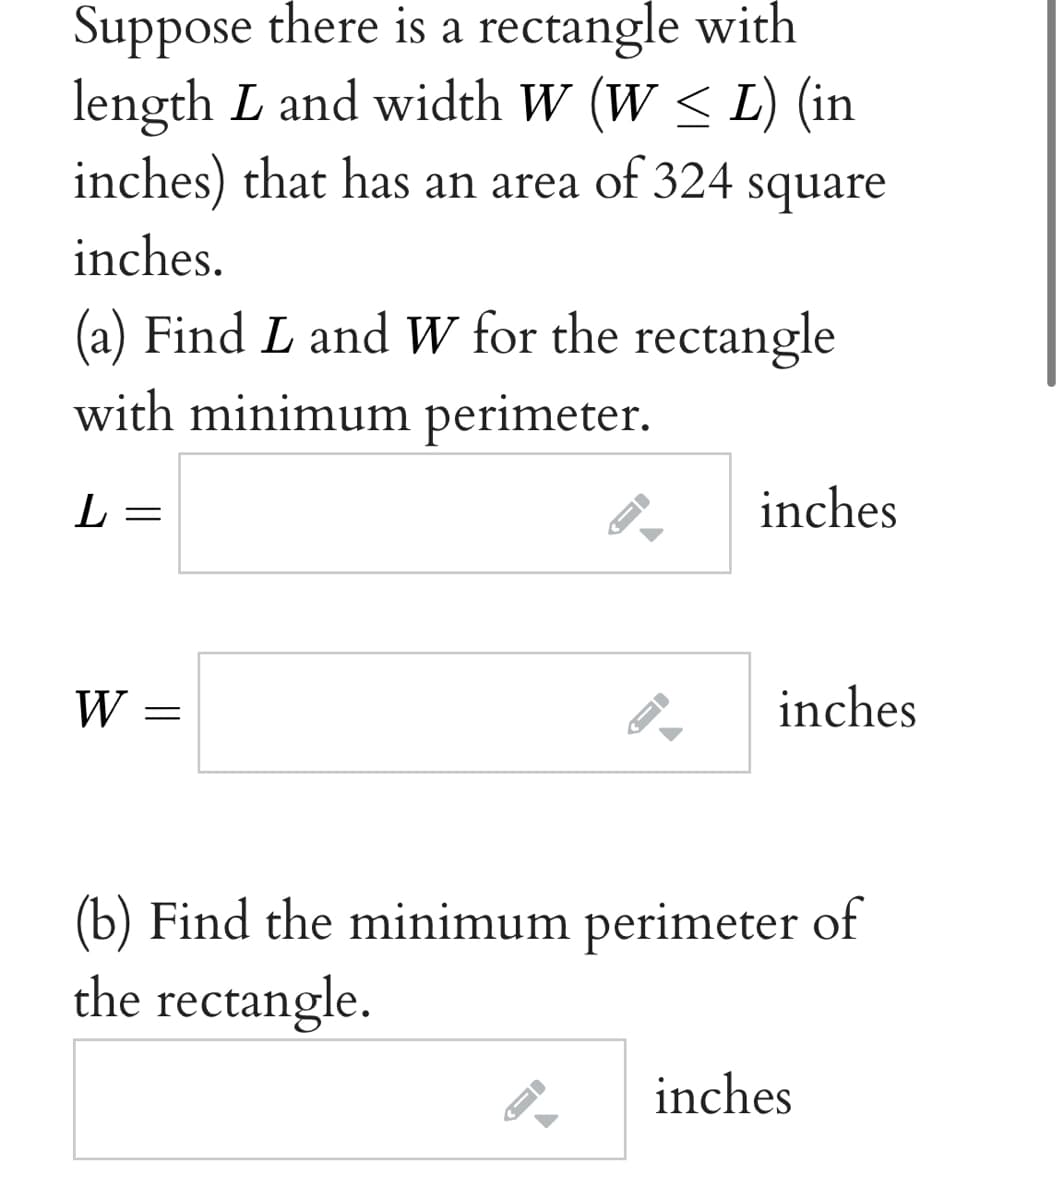 Suppose there is a rectangle with
length L and width W (W < L) (in
inches) that has an area of 324 square
inches.
(a) Find L and W for the rectangle
with minimum perimeter.
L
inches
W
inches
(b) Find the minimum perimeter of
the rectangle.
inches
